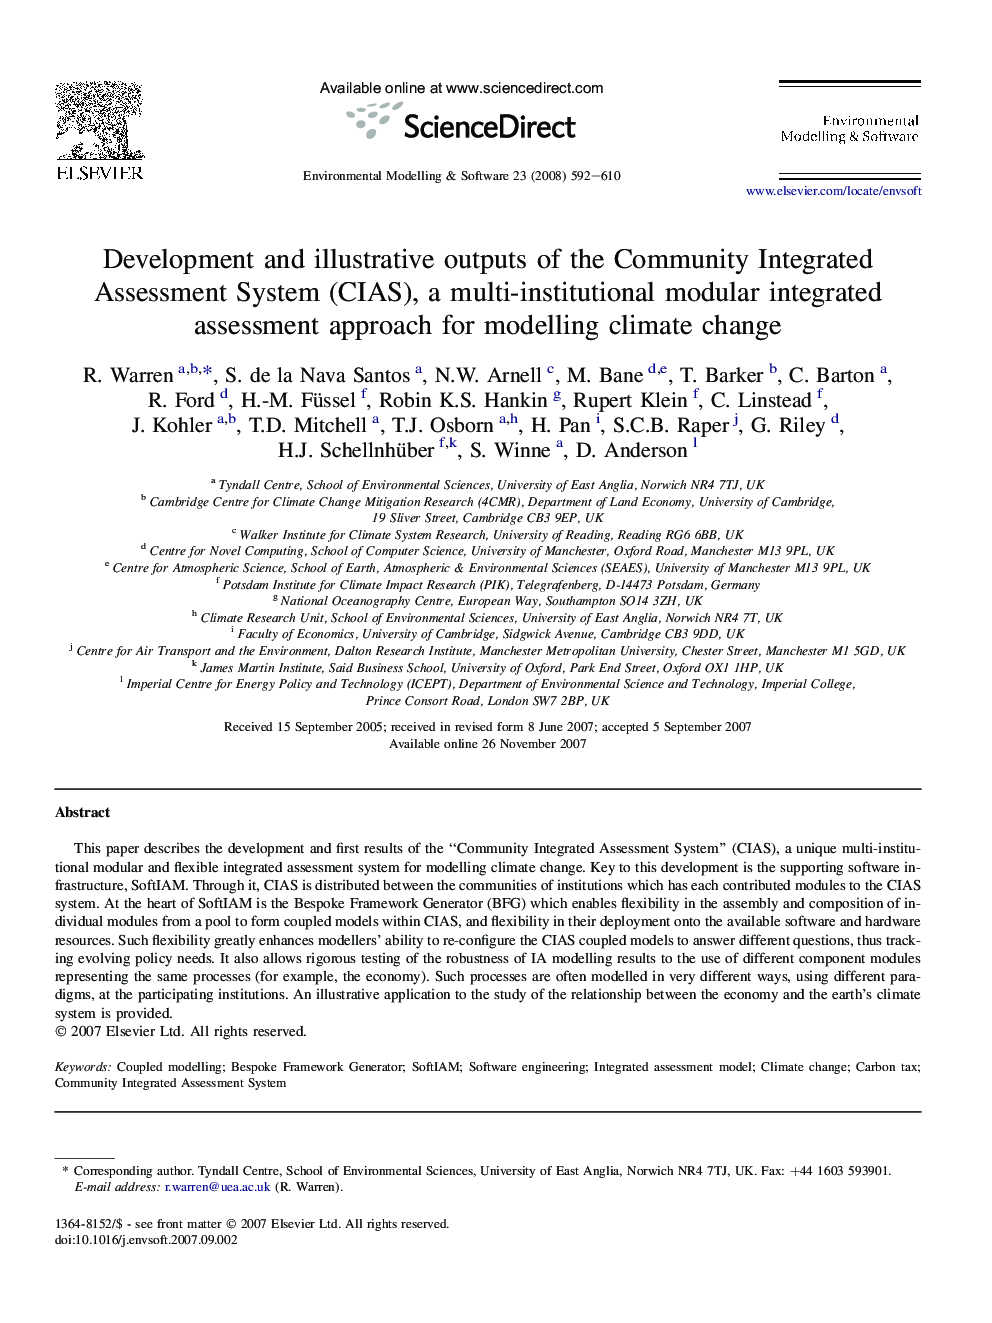 Development and illustrative outputs of the Community Integrated Assessment System (CIAS), a multi-institutional modular integrated assessment approach for modelling climate change